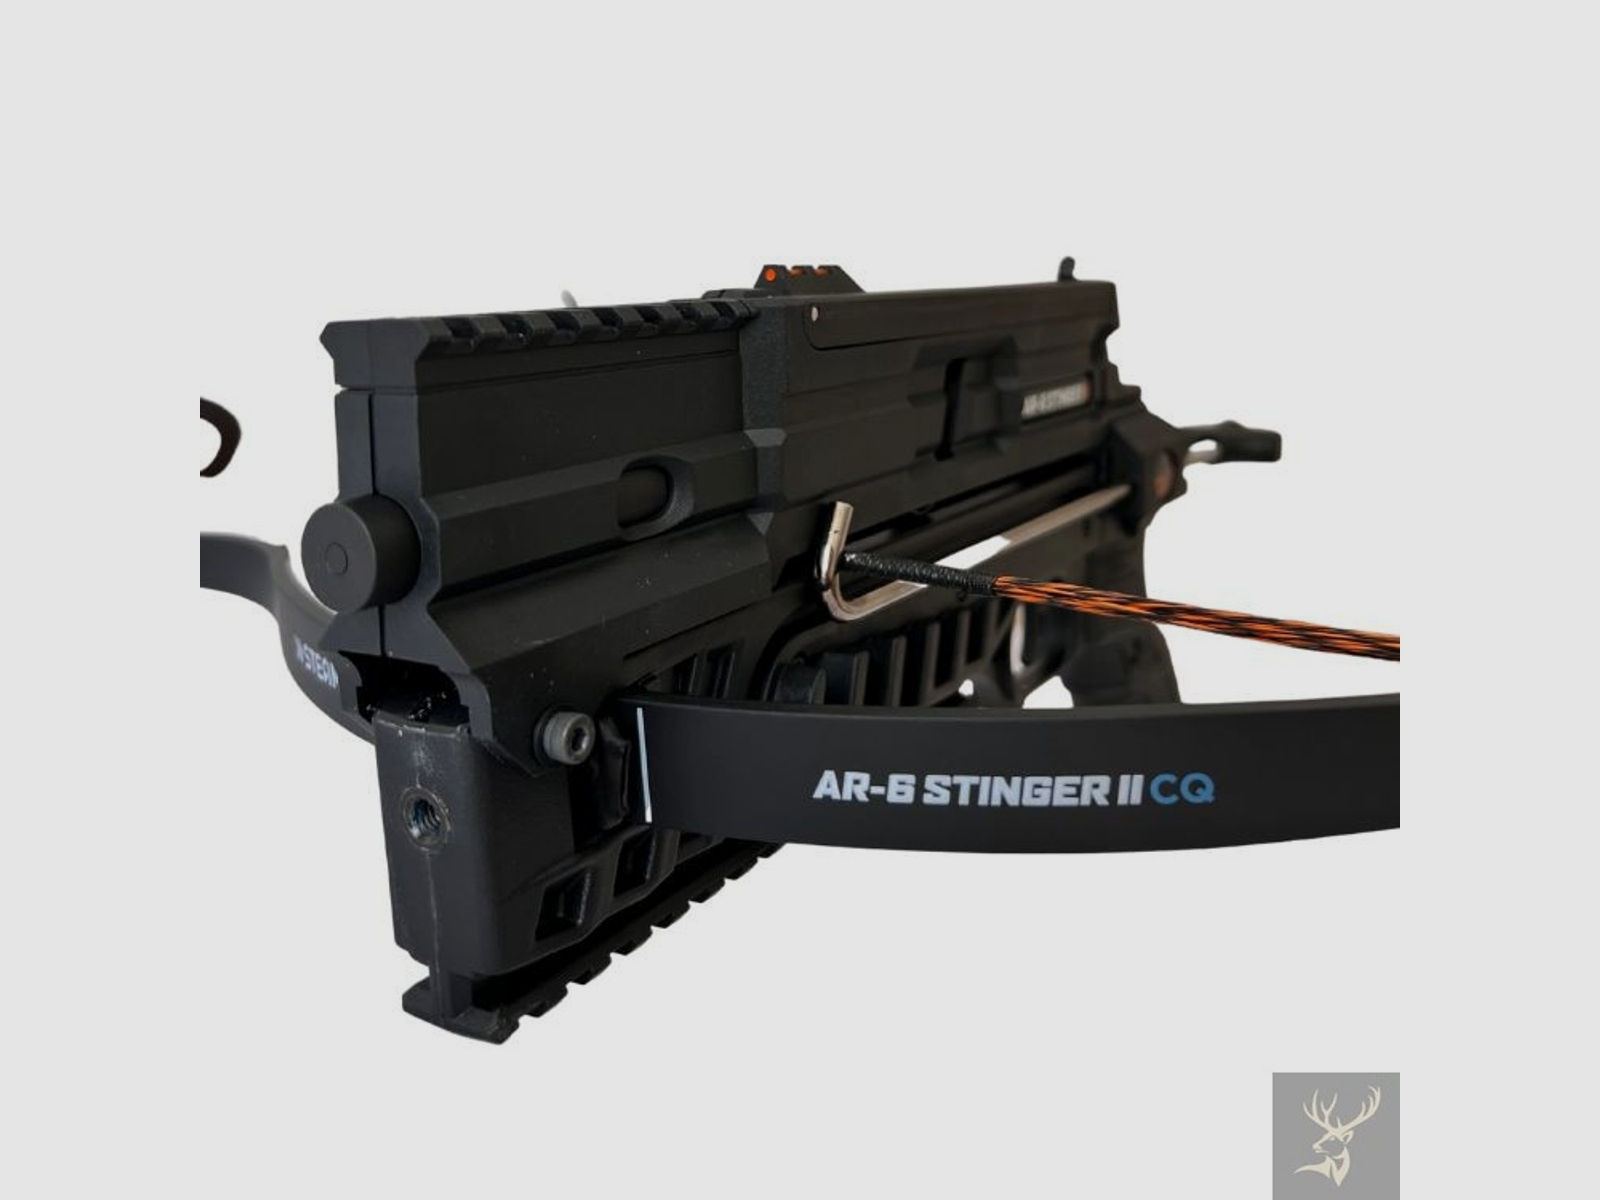 Steambow AR-6 Stinger II Compact